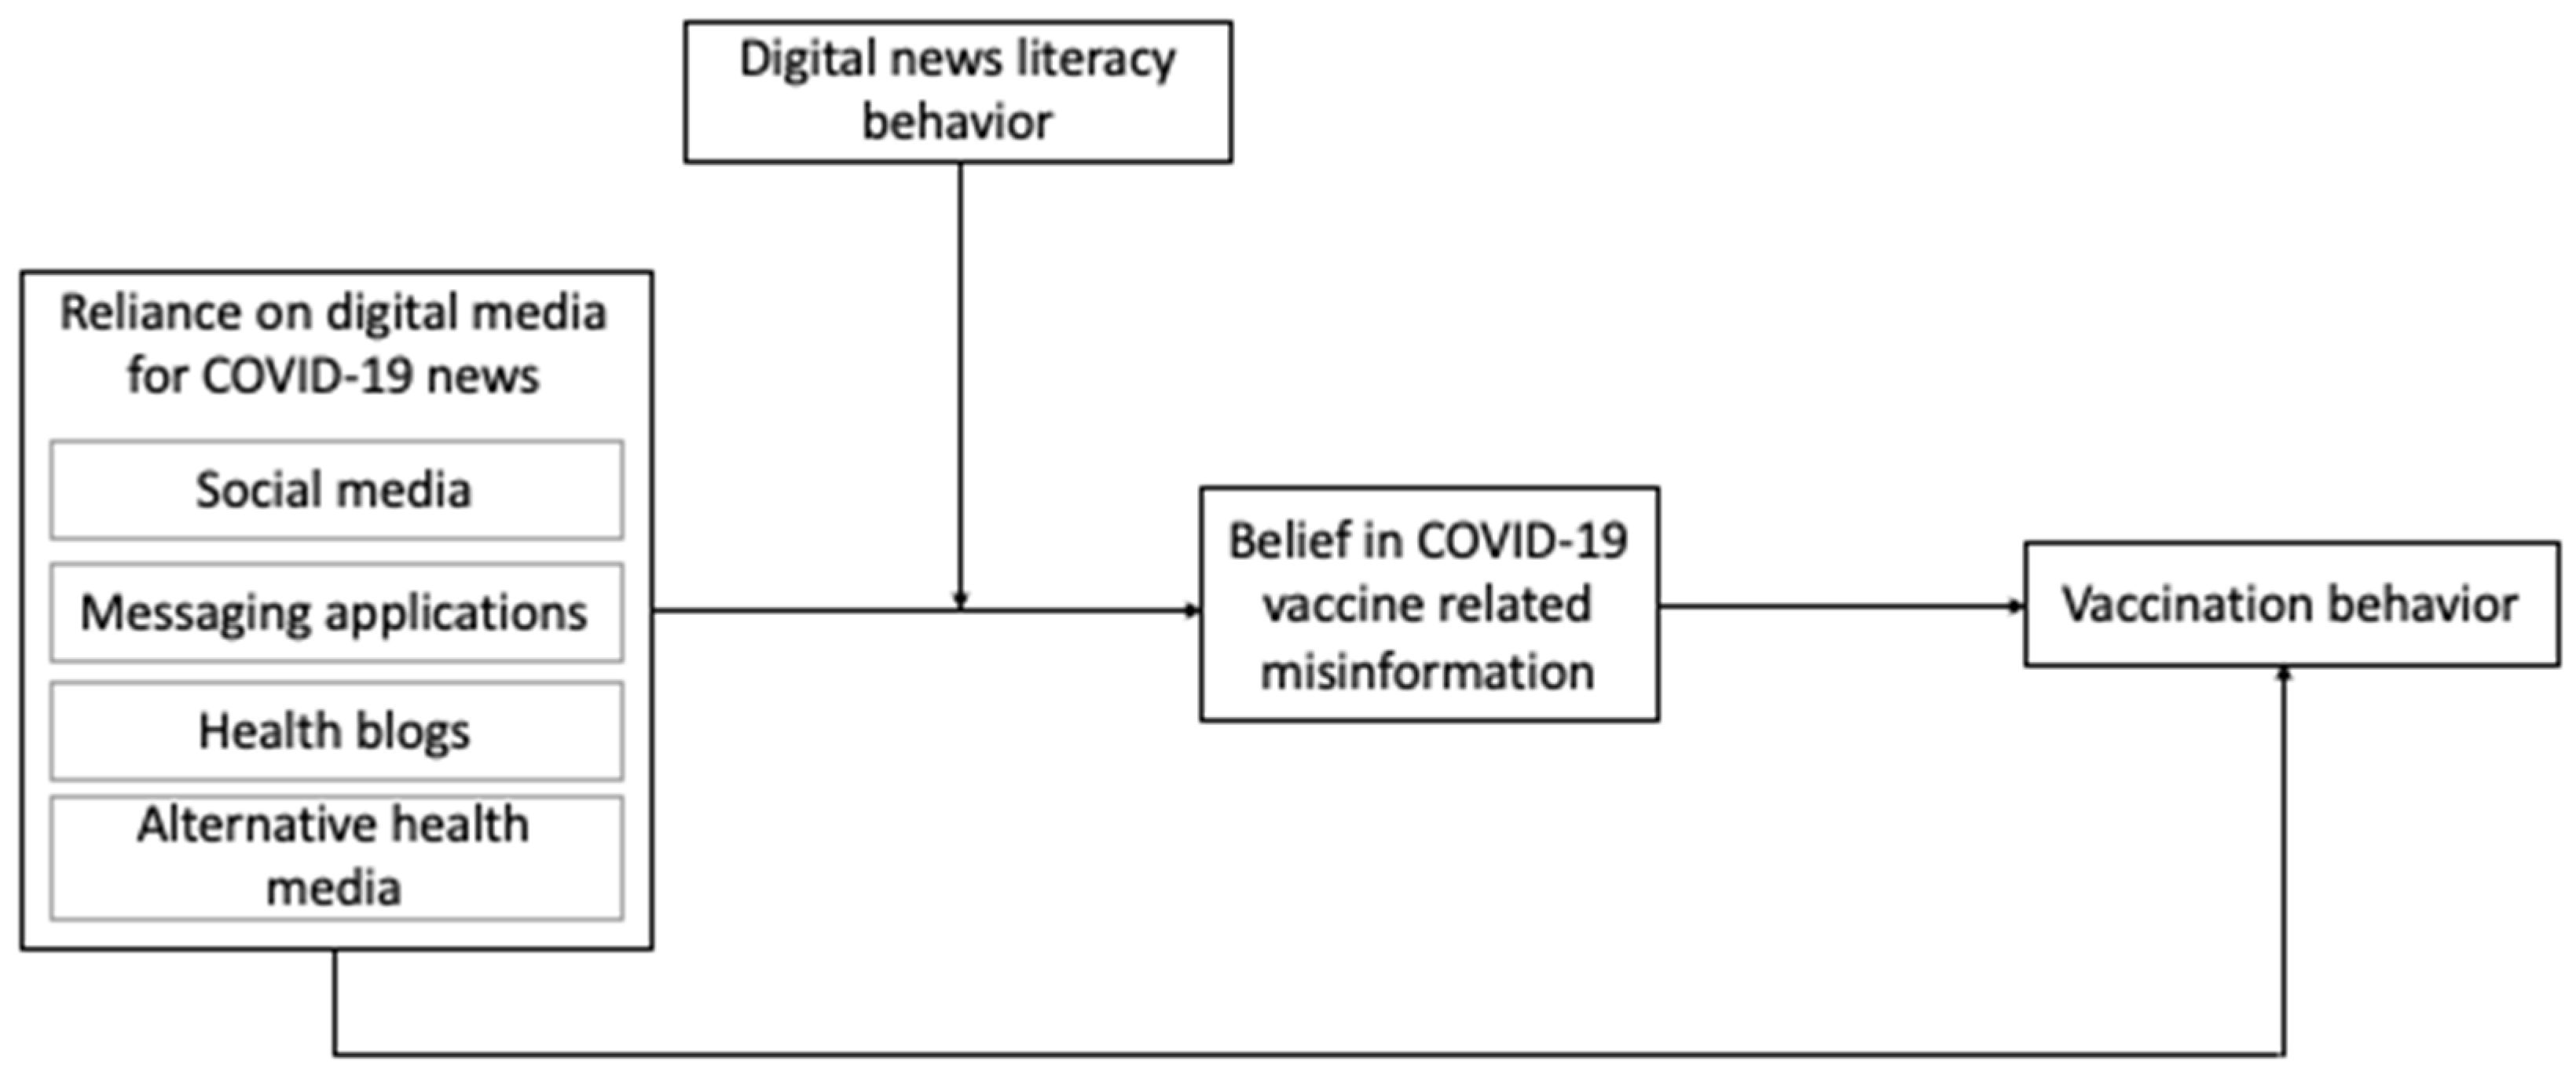 Ijerph Free Full Text Covid 19 News Exposure And Vaccinations A Moderated Mediation Of Digital News Literacy Behavior And Vaccine Misperceptions